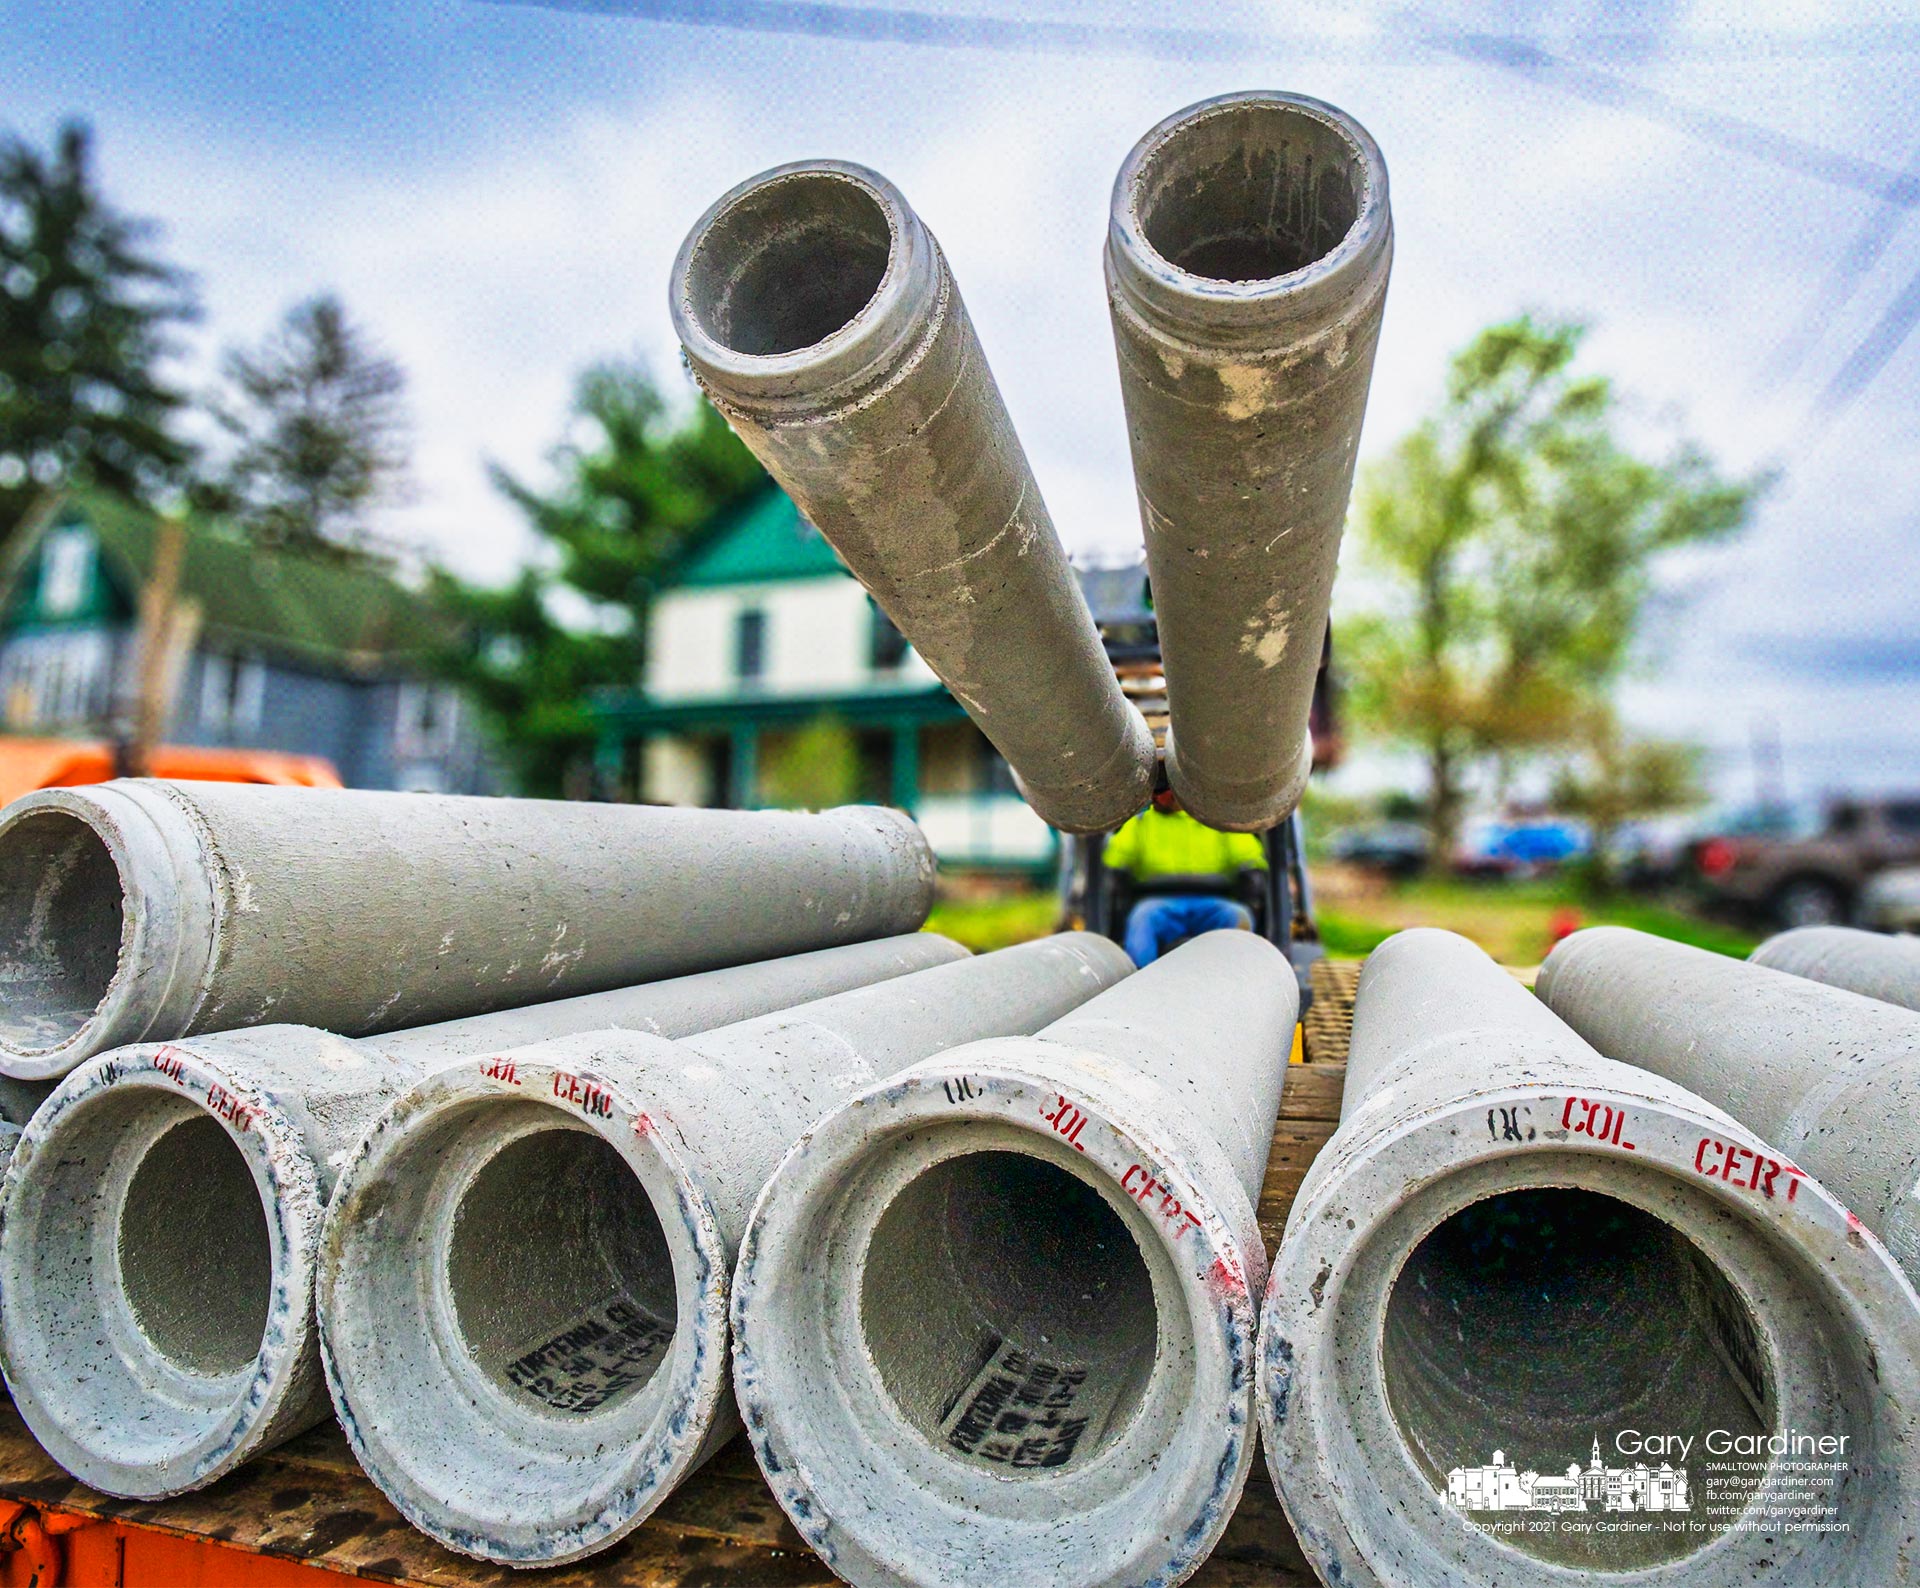 A truckload of concrete drain pipes are offloaded on West College where the first week of construction for the new parking lot behind city hall ended. My Final Photo for April 16, 2021.